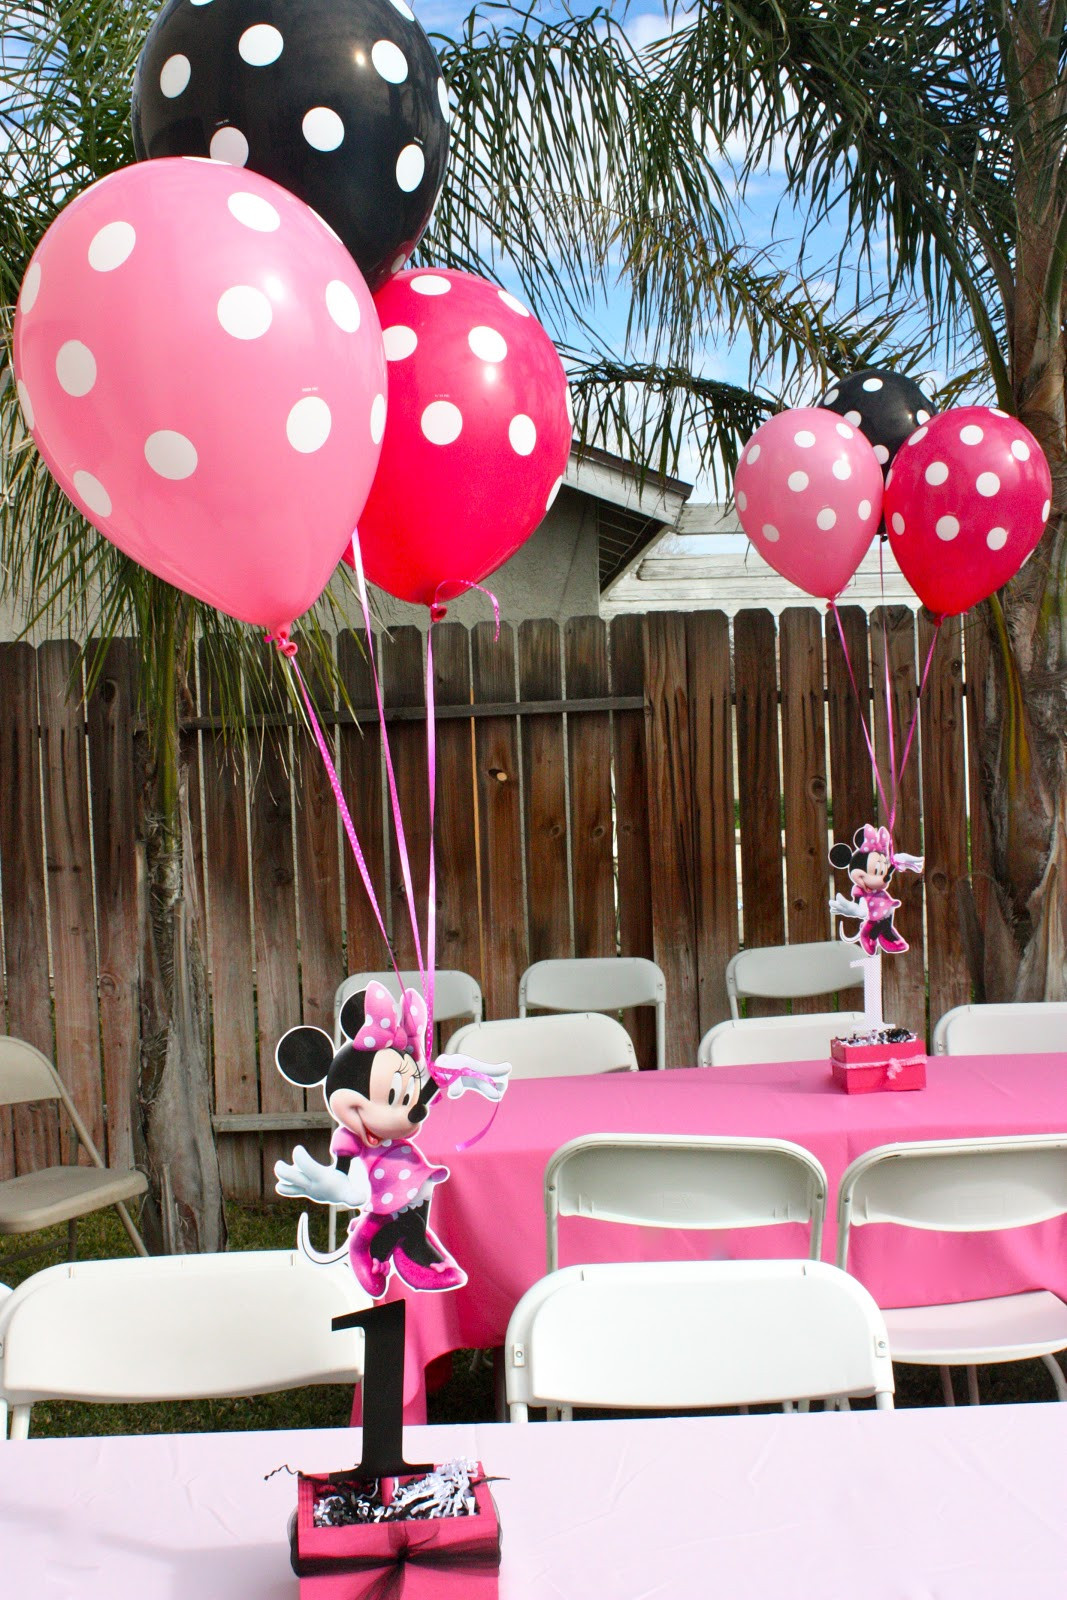 Minnie Mouse Birthday Party Decorations
 tini Sophia s 1st Birthday Minnie Mouse Party